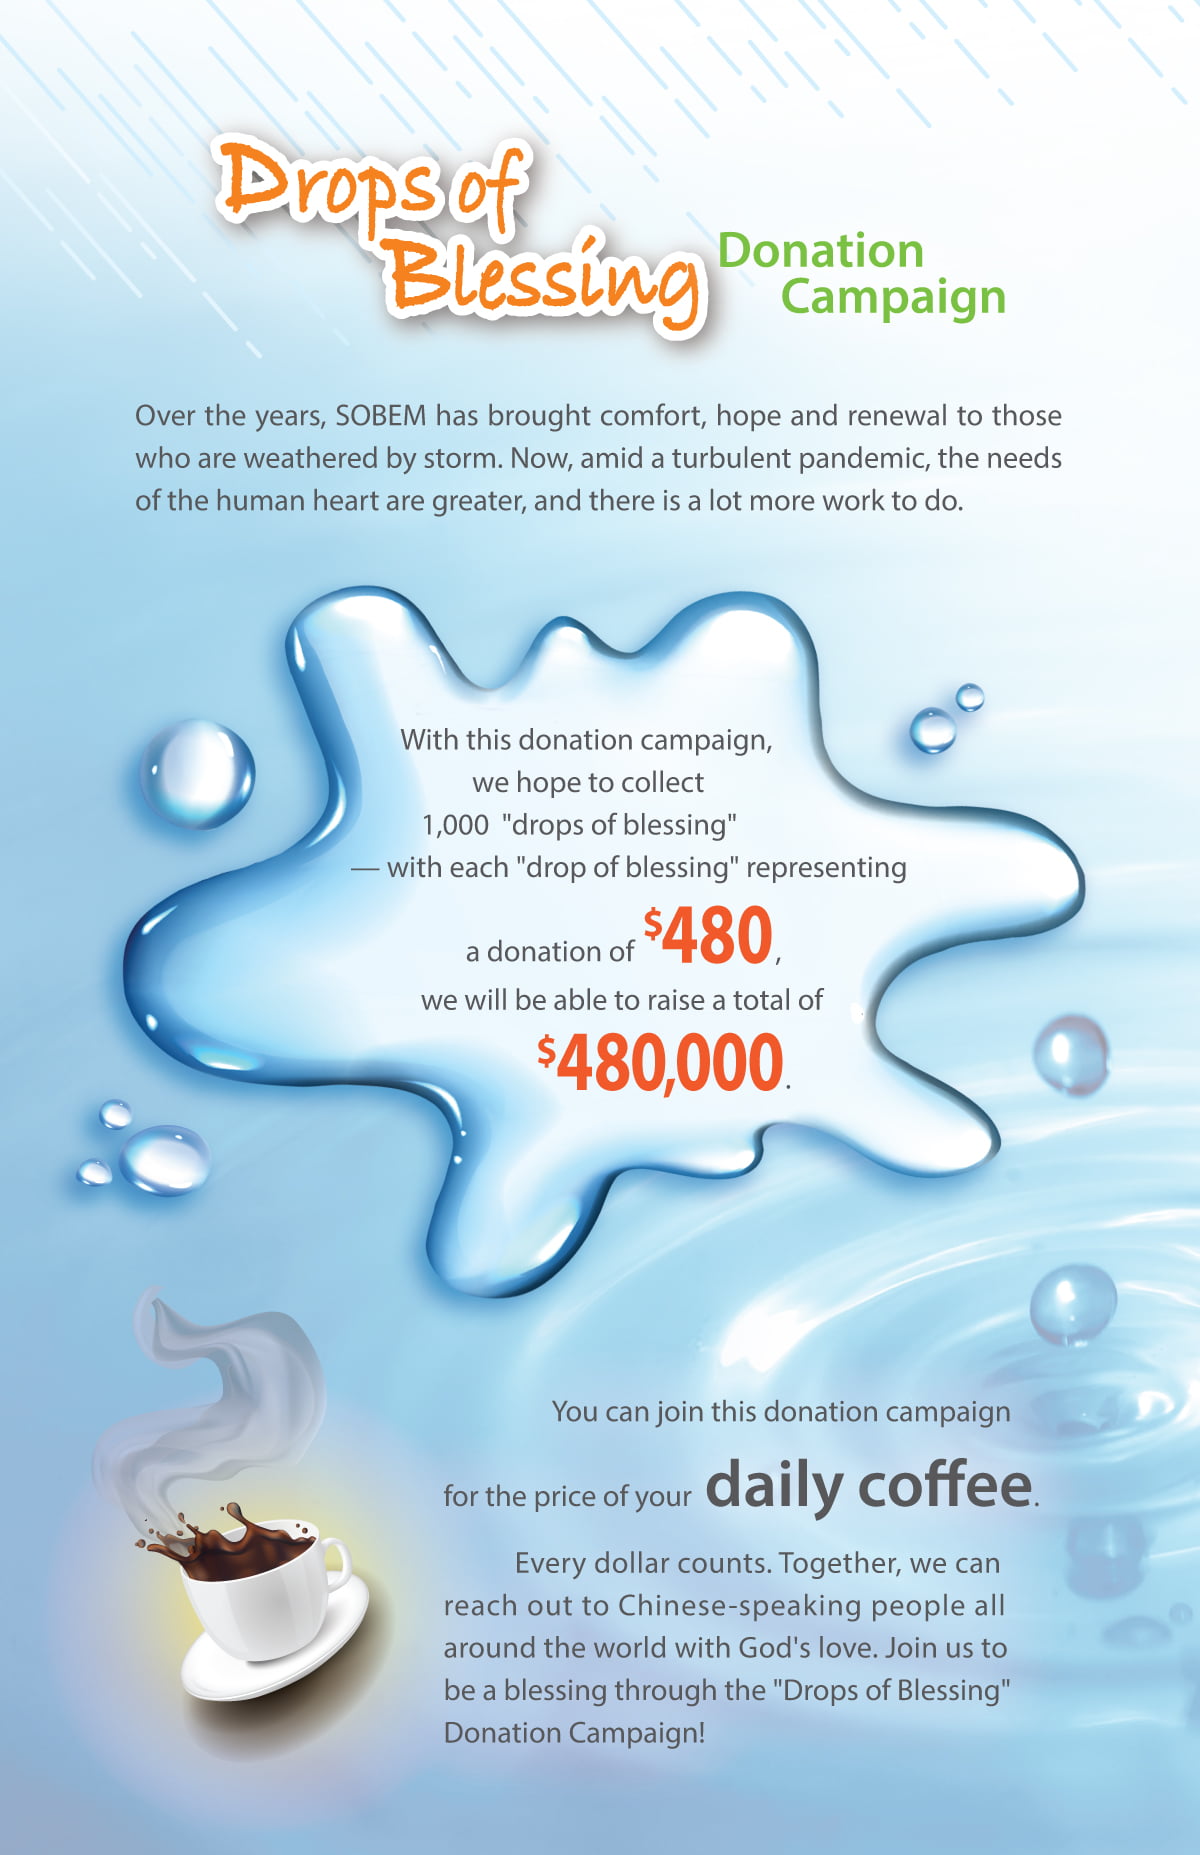 One-Drop-of-Rain Pledge，you can join this campaign for the price of you daily coffee, $40 x 12 months = $480/year represent 1 drop of blessing, we hope to collect 100 drops of blessing, then we will be able to raise a total of $480,000.